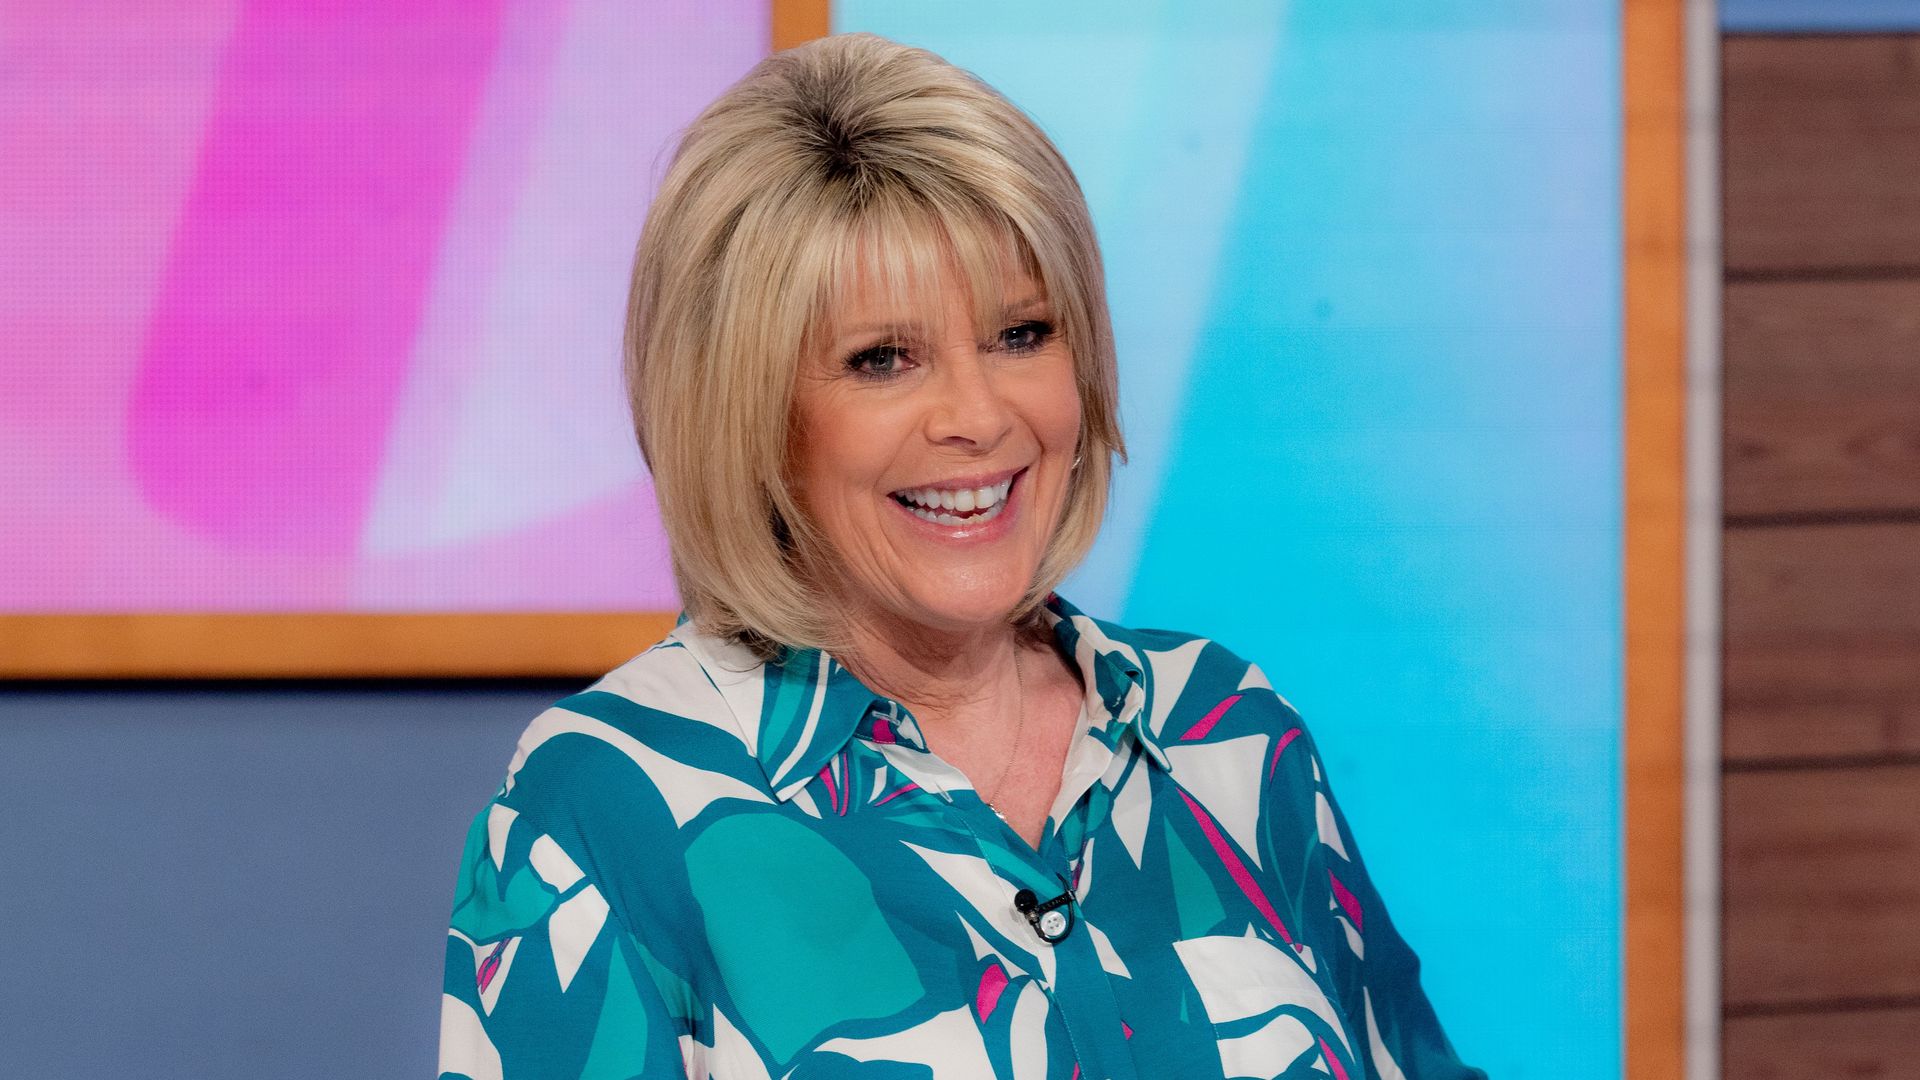 Ruth Langsford in a printed shirt on Loose Women